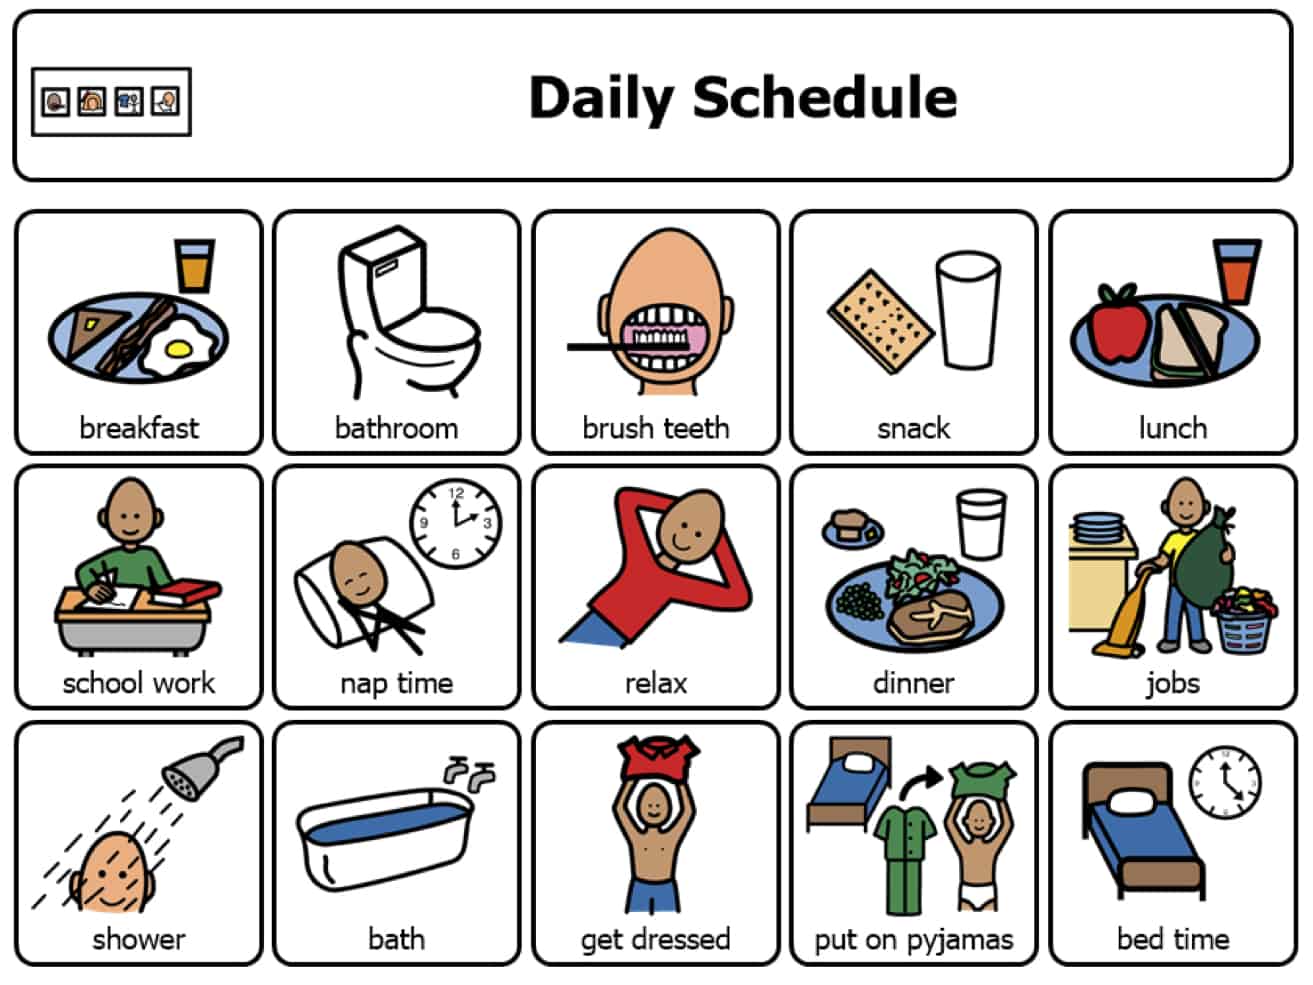 Supporting Children With Autism Spectrum Disorder Using A Visual Scheduling Tool THE EDUCATION HUB